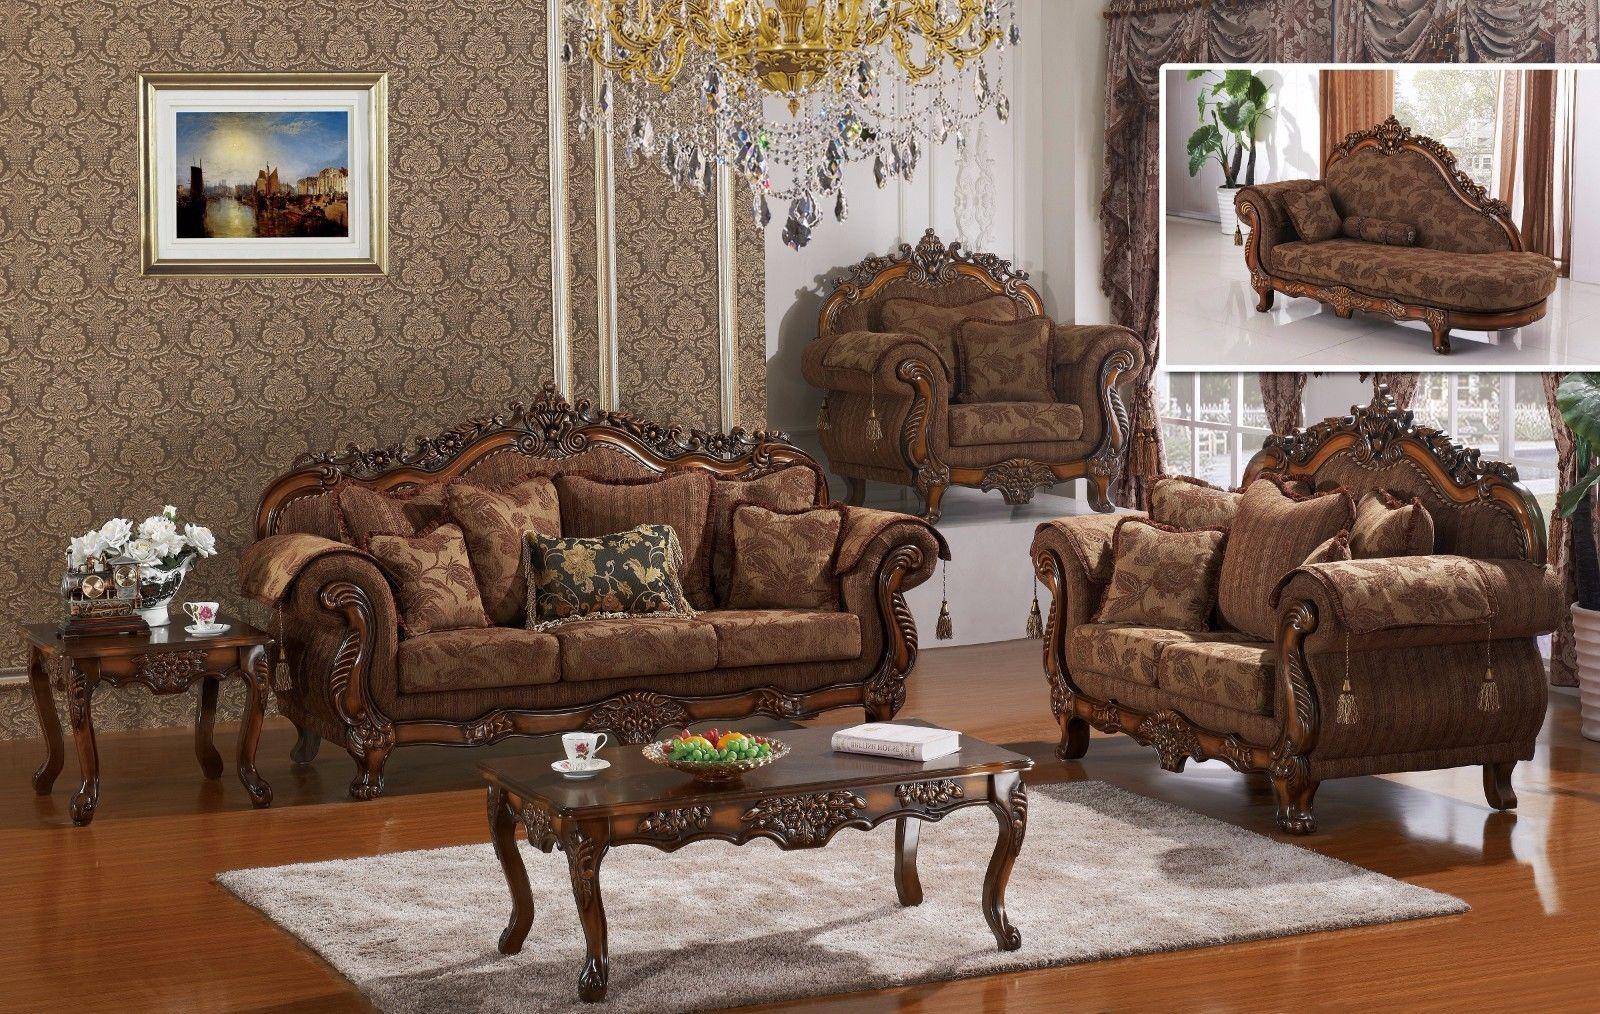 

    
Meridian 681 Sheraton Living Room Set 3pcs in Cherry Finish Traditional Style
